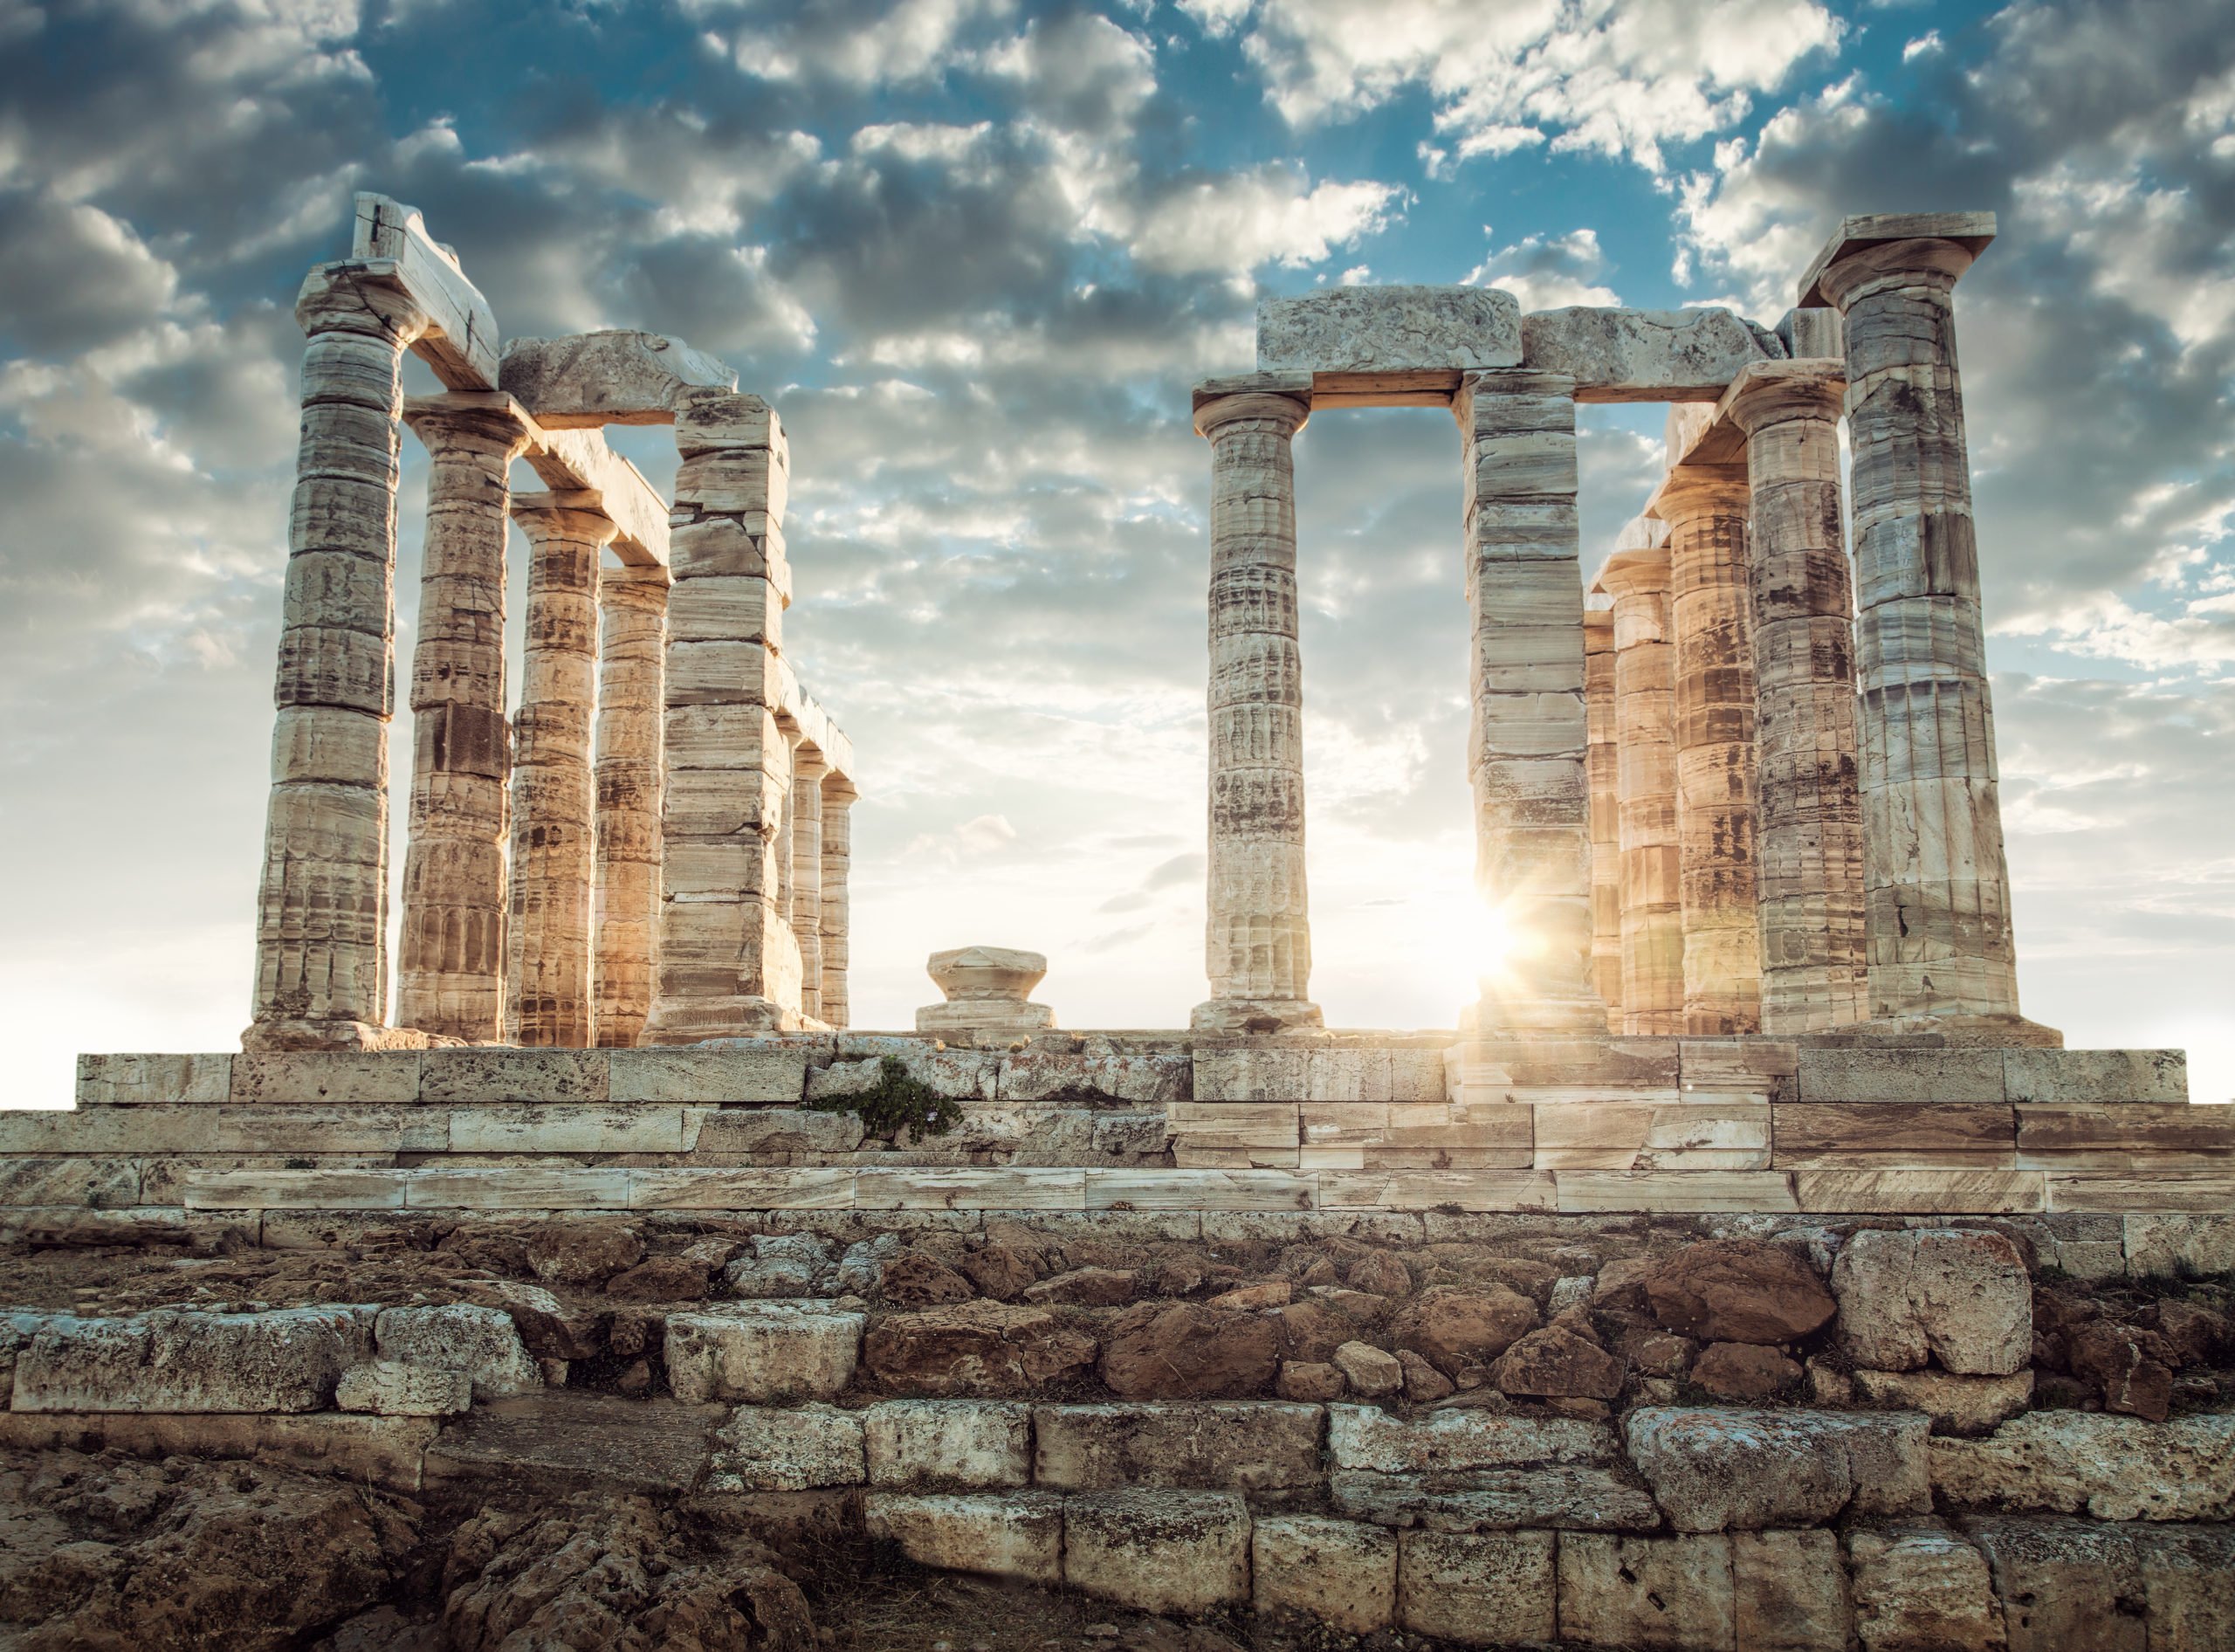 Explore The Temple Of Poseidon At Cape Sounio On The Sunset Cape Sounio Tour From Athens